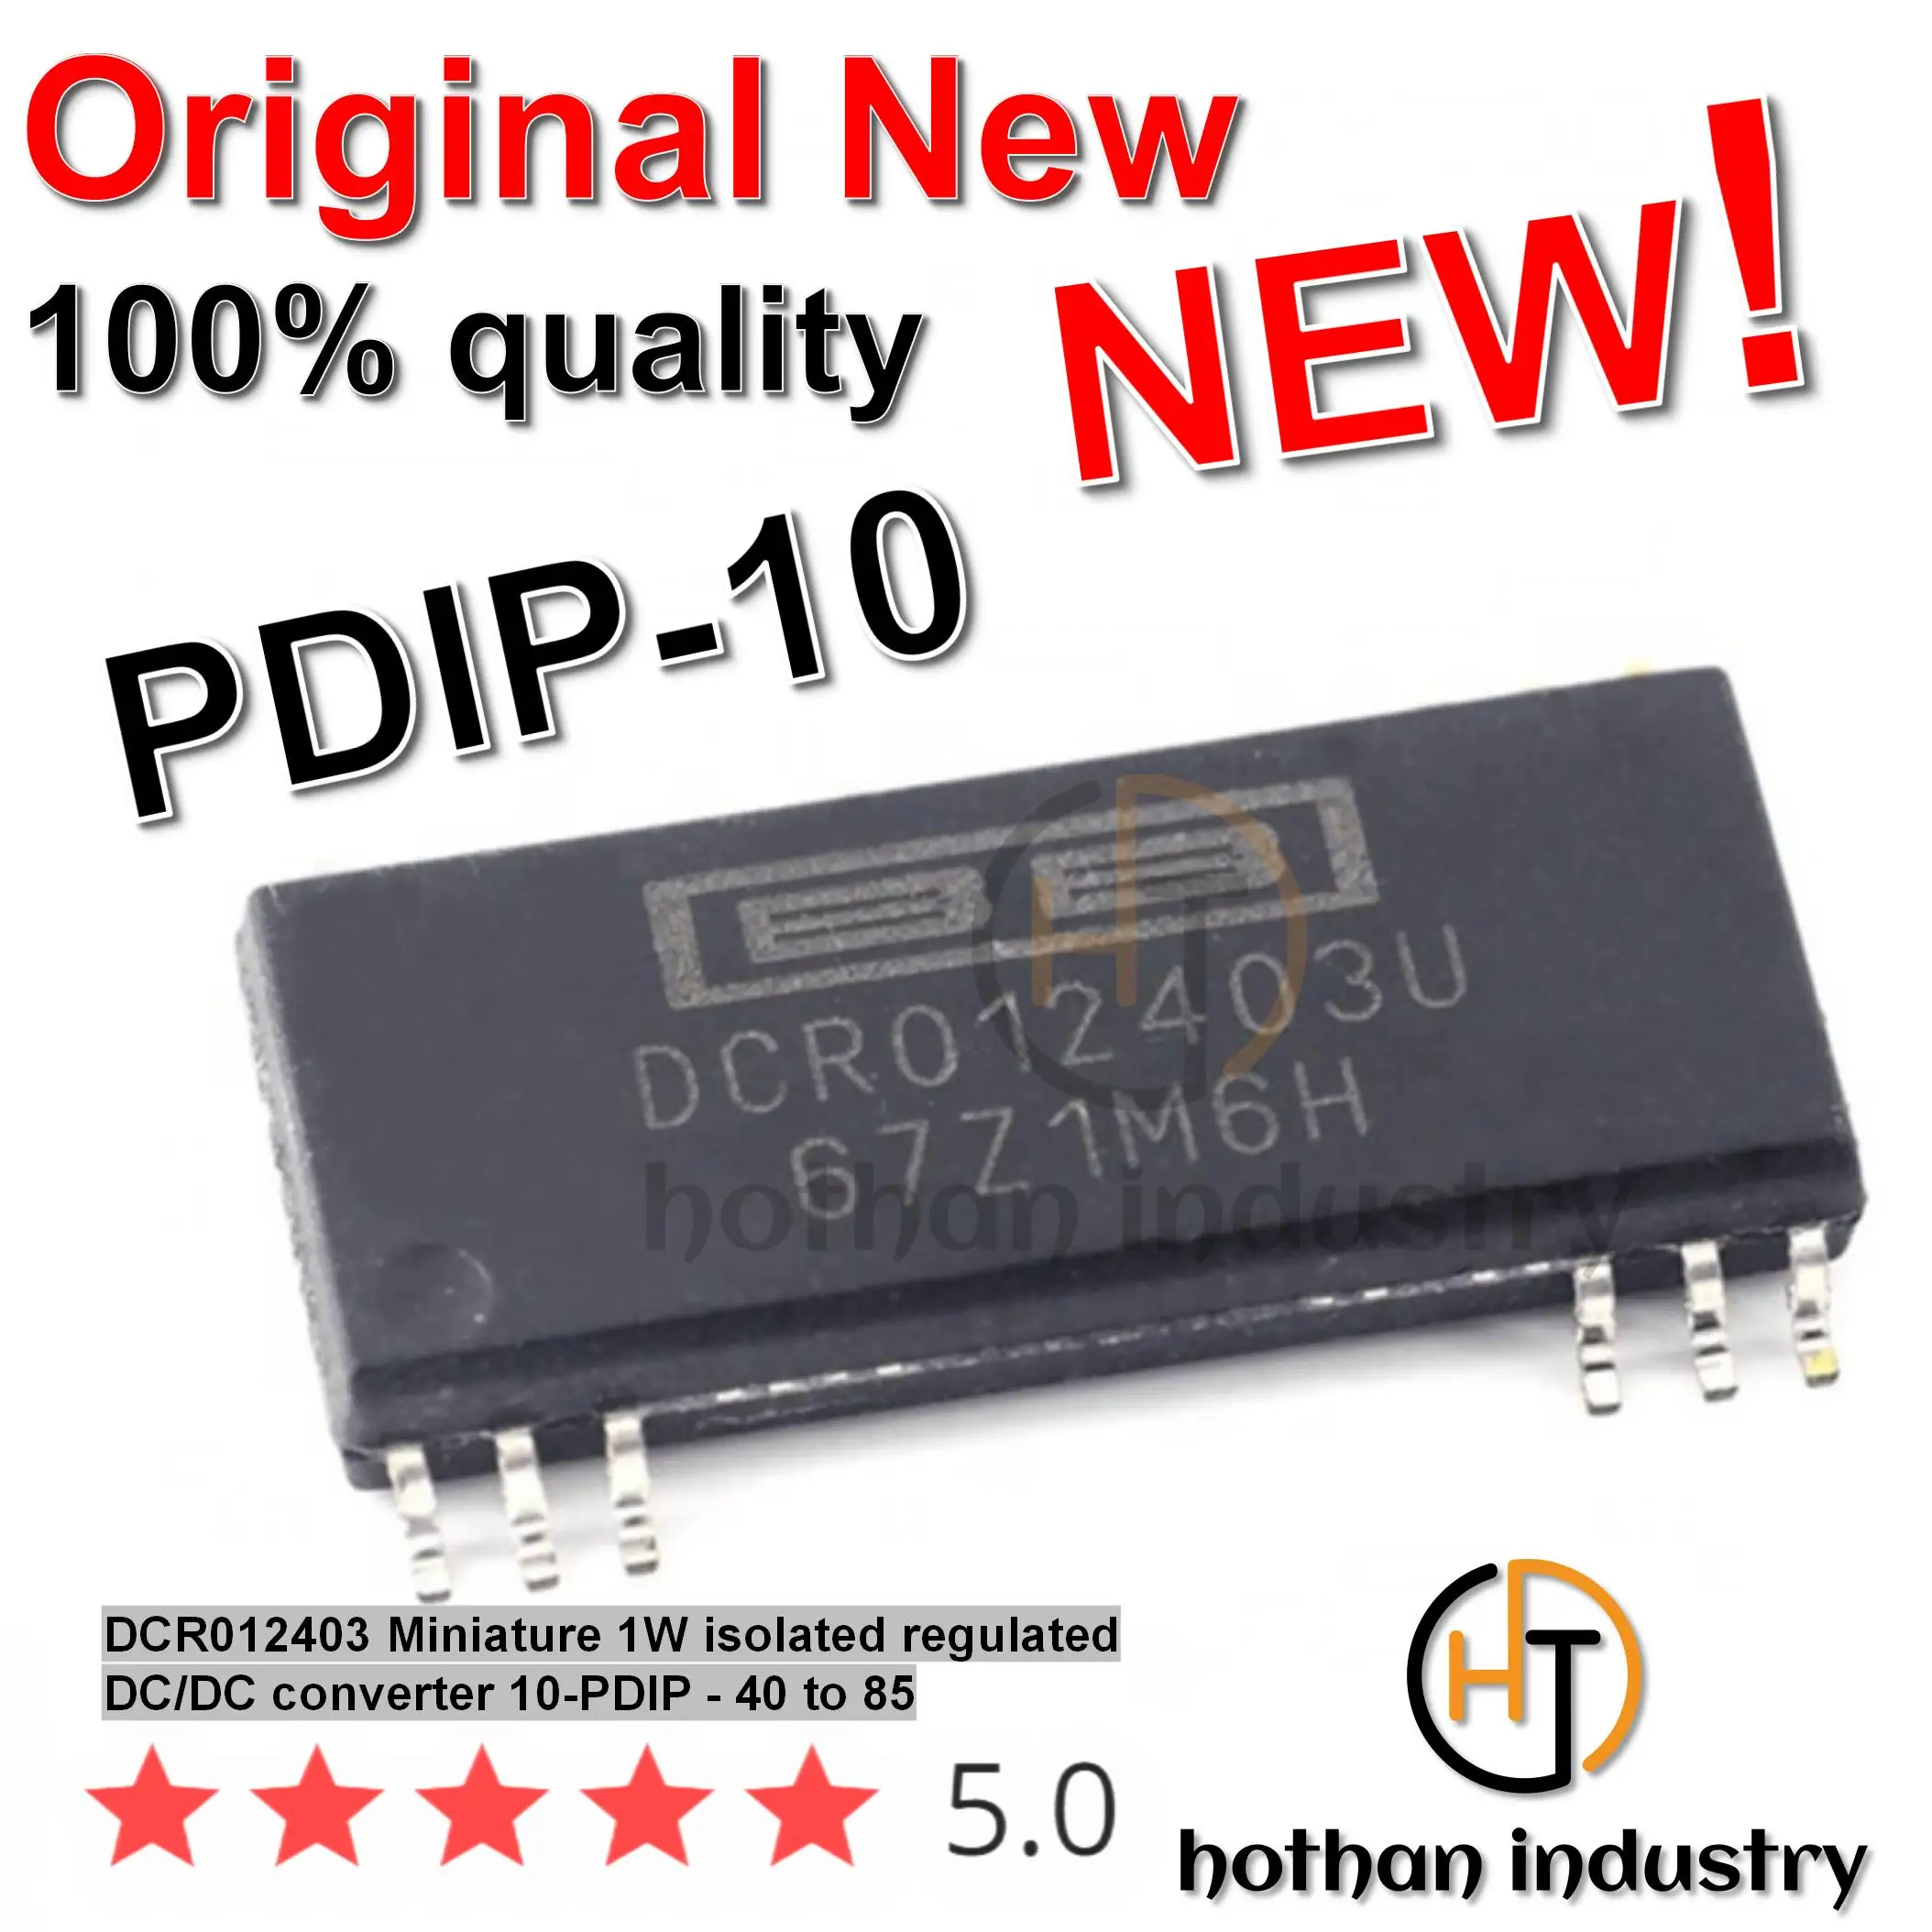 

[1pcs] 100% Imported ORIGNAL DCR012403 DCR 012403 Miniature 1W isolated regulated DC/DC converter 10-PDIP - 40 to 85